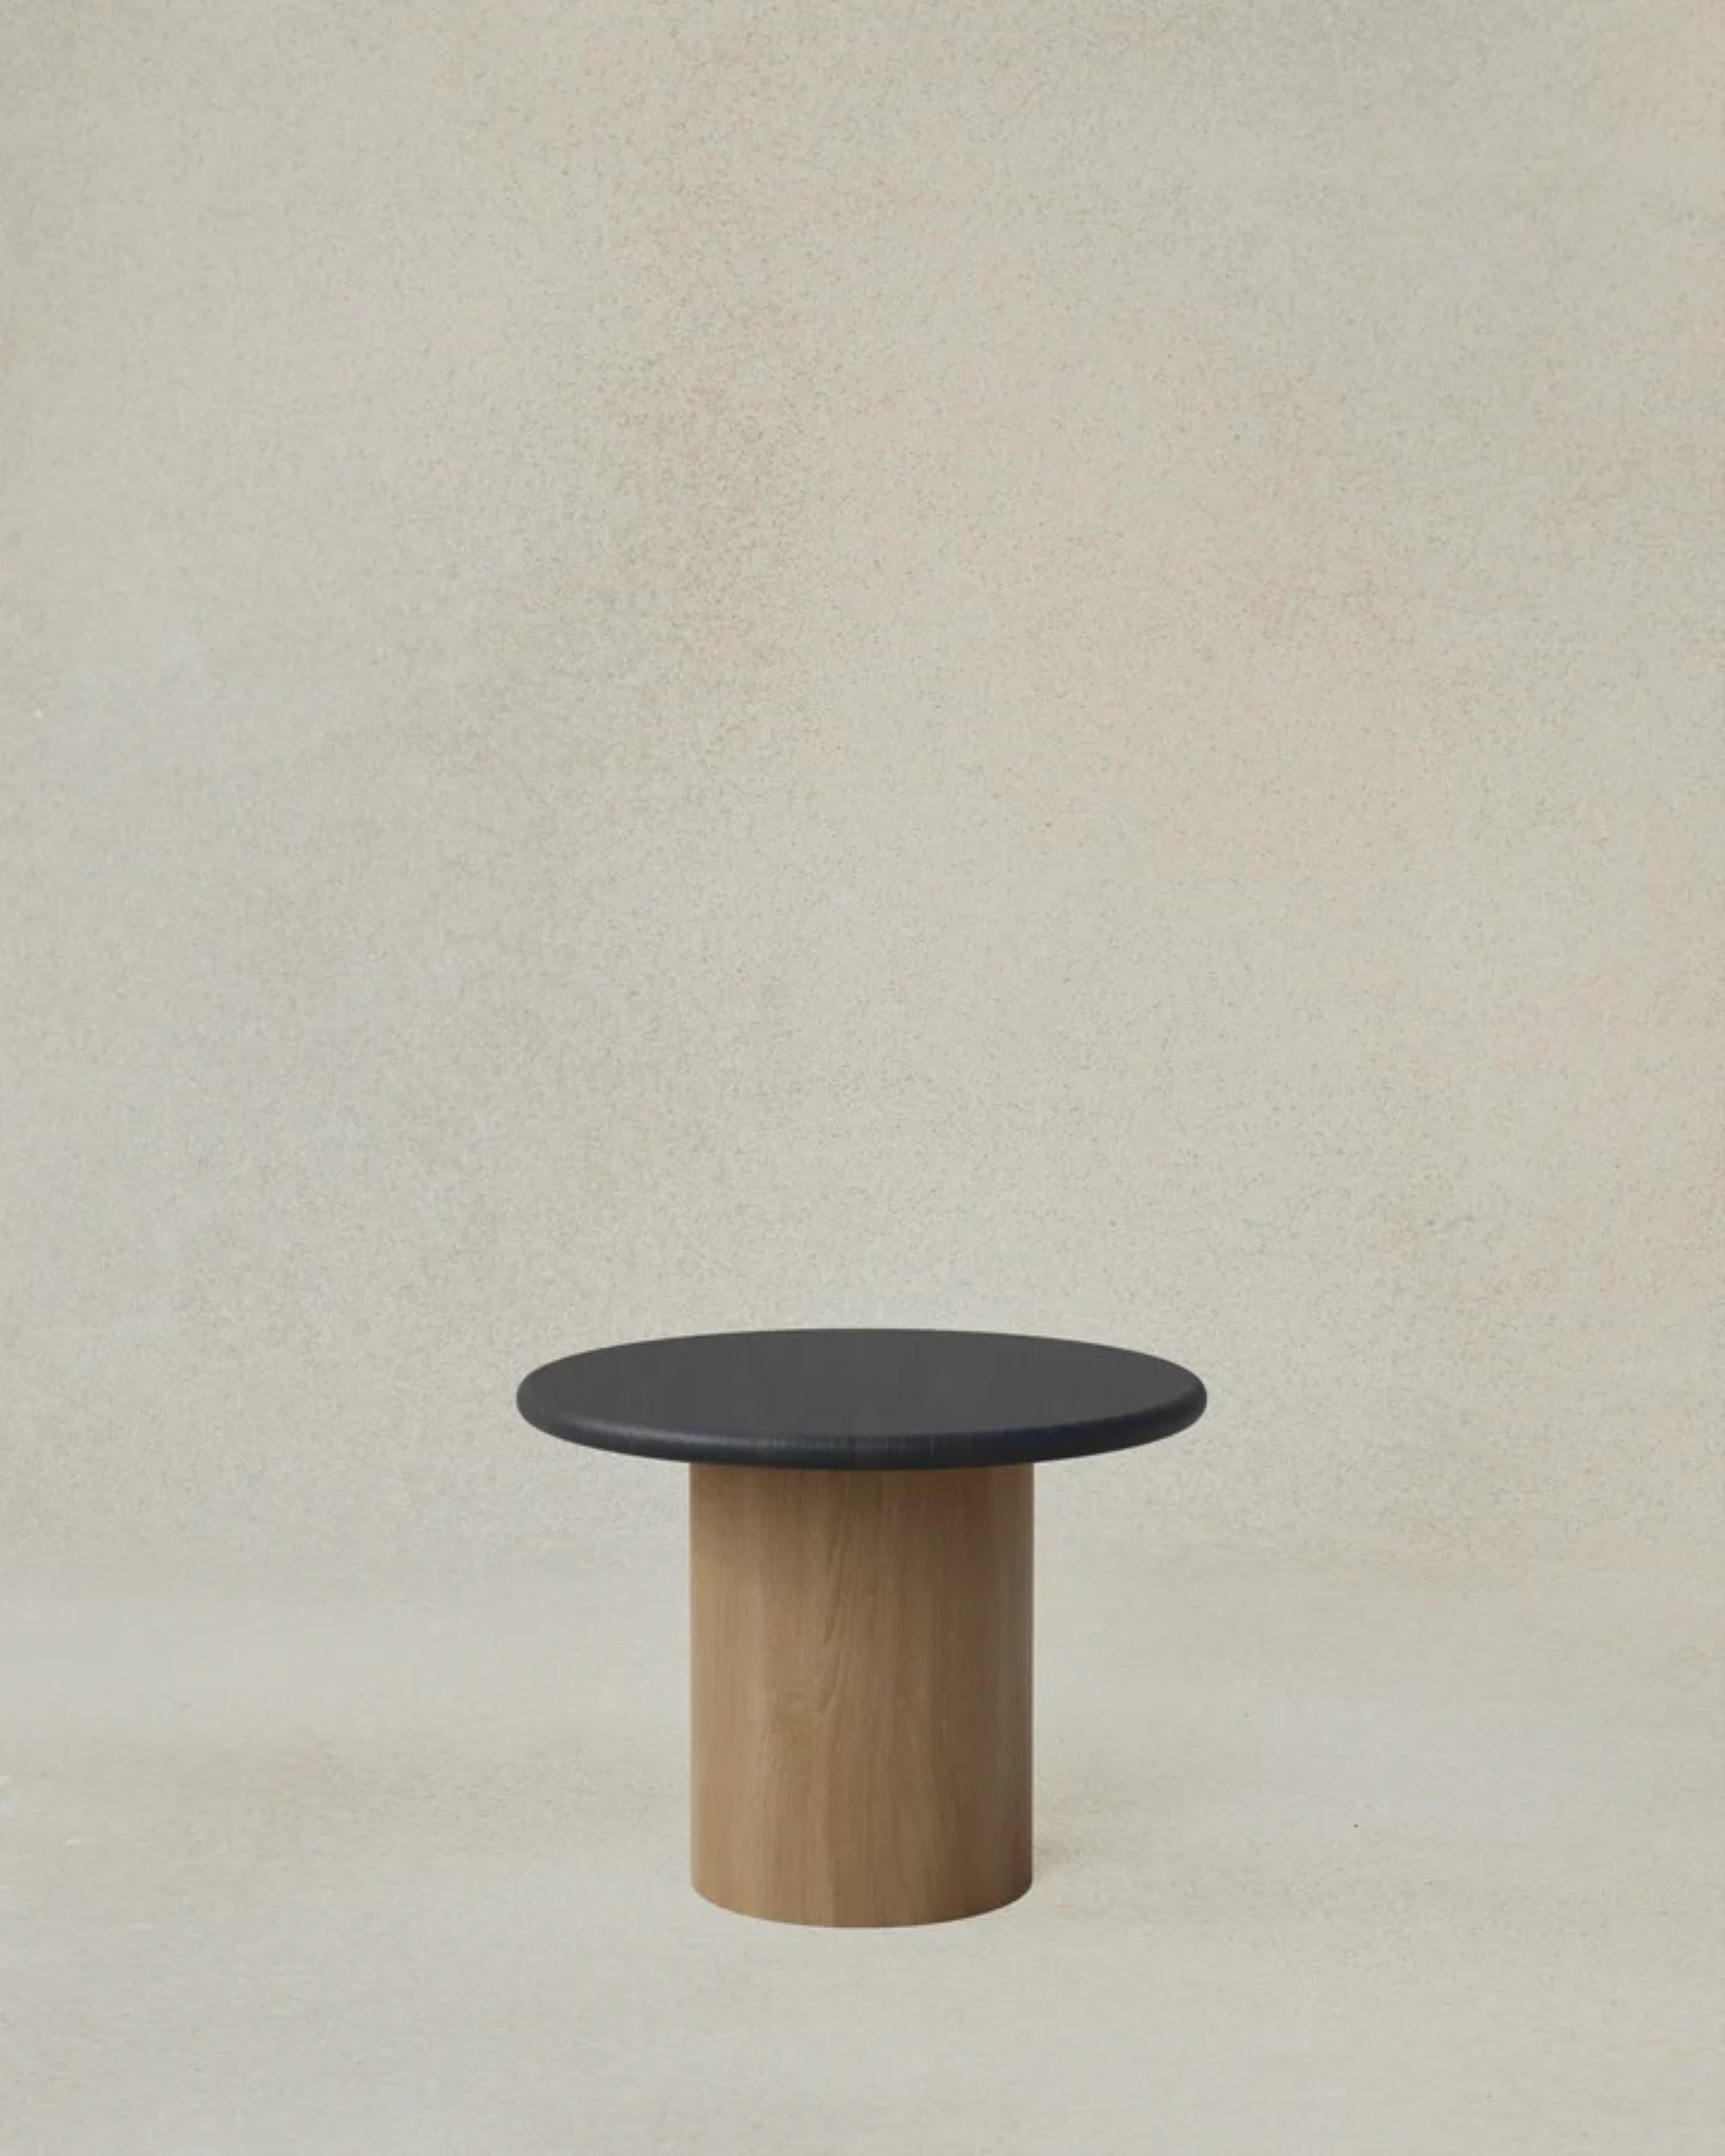 The raindrop 500 is the largest side table we offer in the series can be paired with a 300 or 1000, or both! Now available in a range of finishes to suit any interior or style. The raindrops nestle together to form a cascading series of tables in